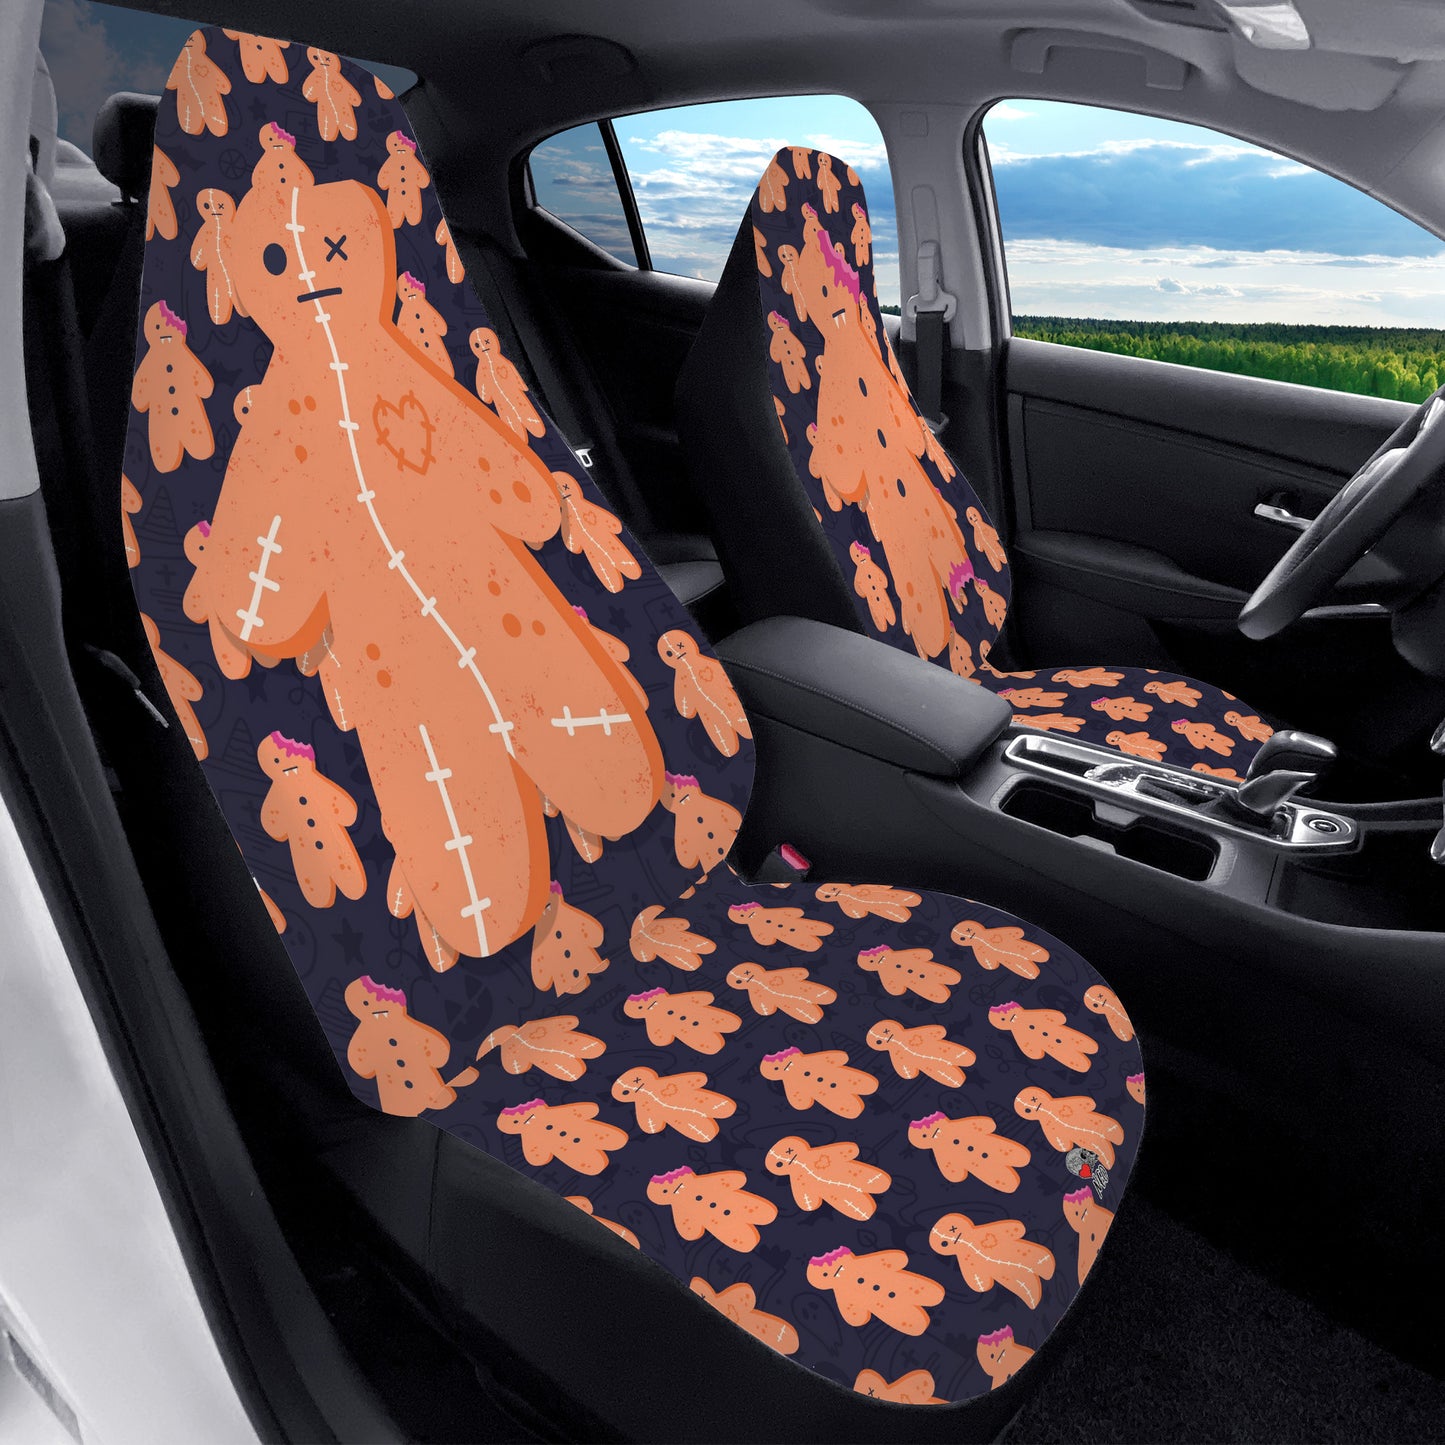 GInger Dolls CAr Seat Covers